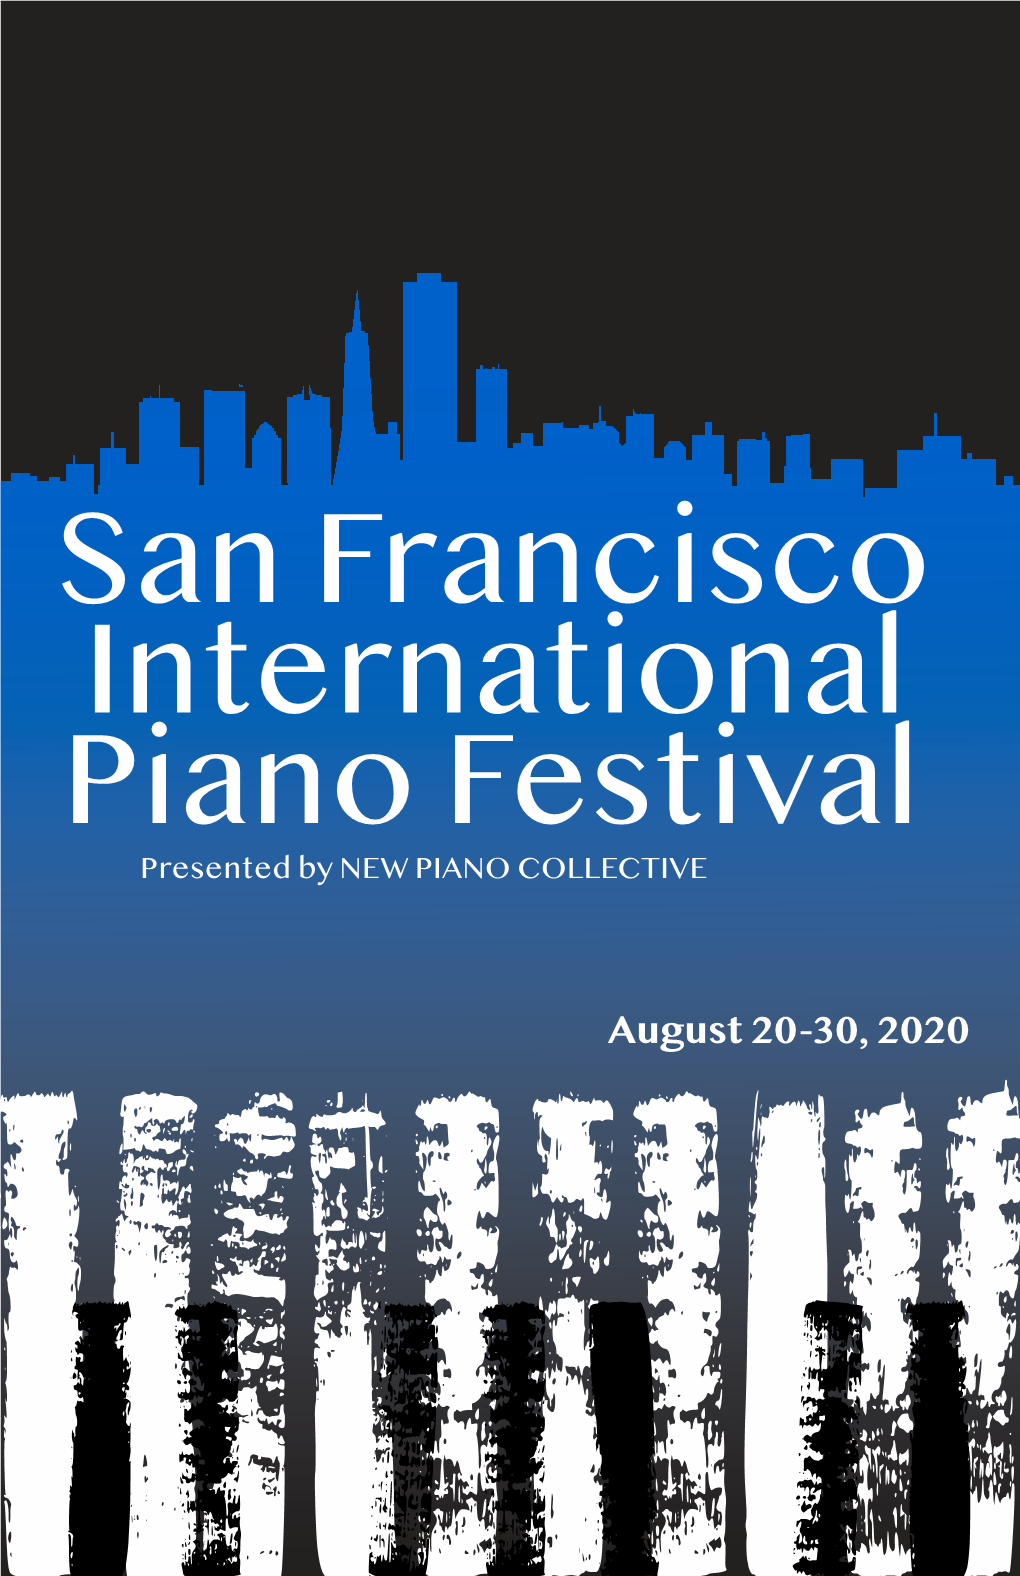 San Francisco International Piano Festival Presented by NEW PIANO COLLECTIVE